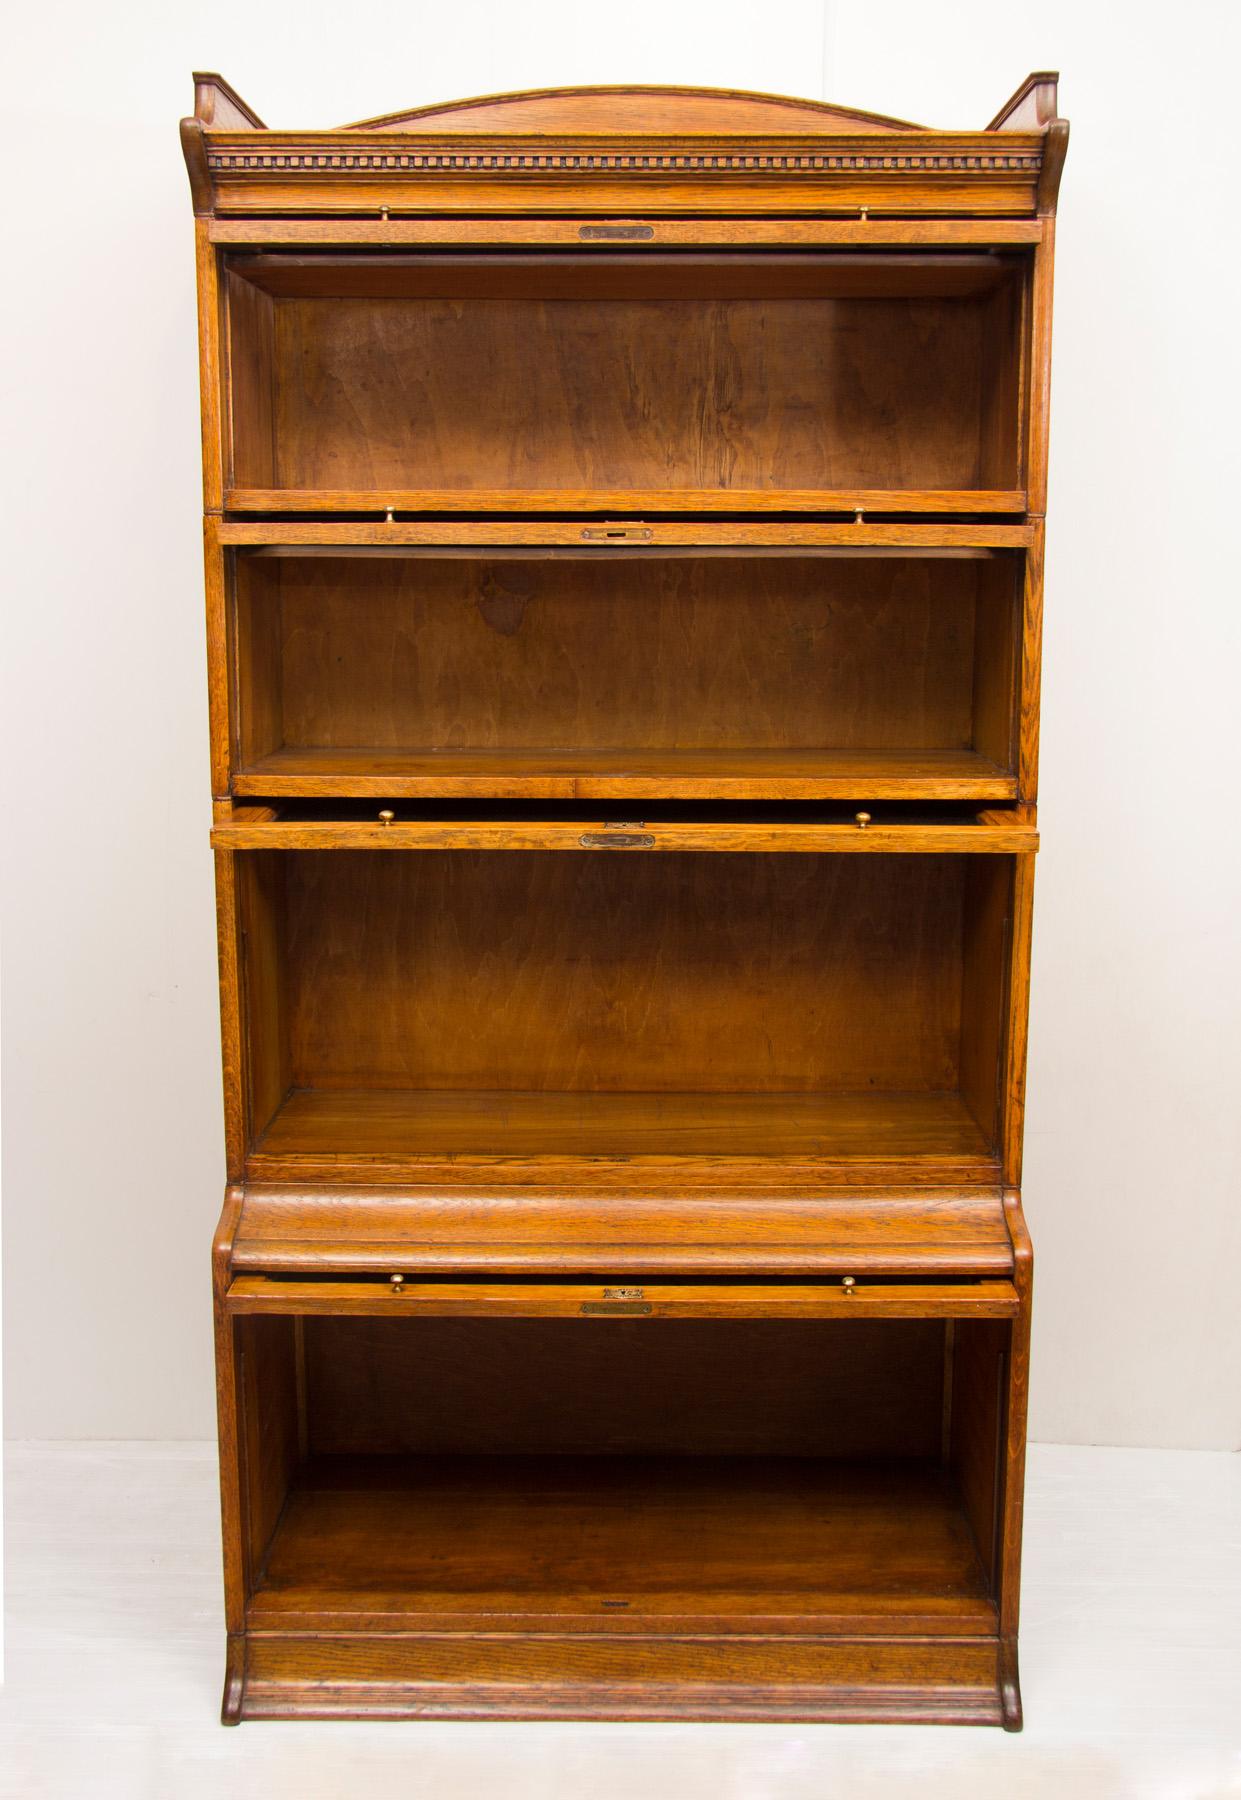 1920s-1930s oak stacking bookcase by Harris Lebus.